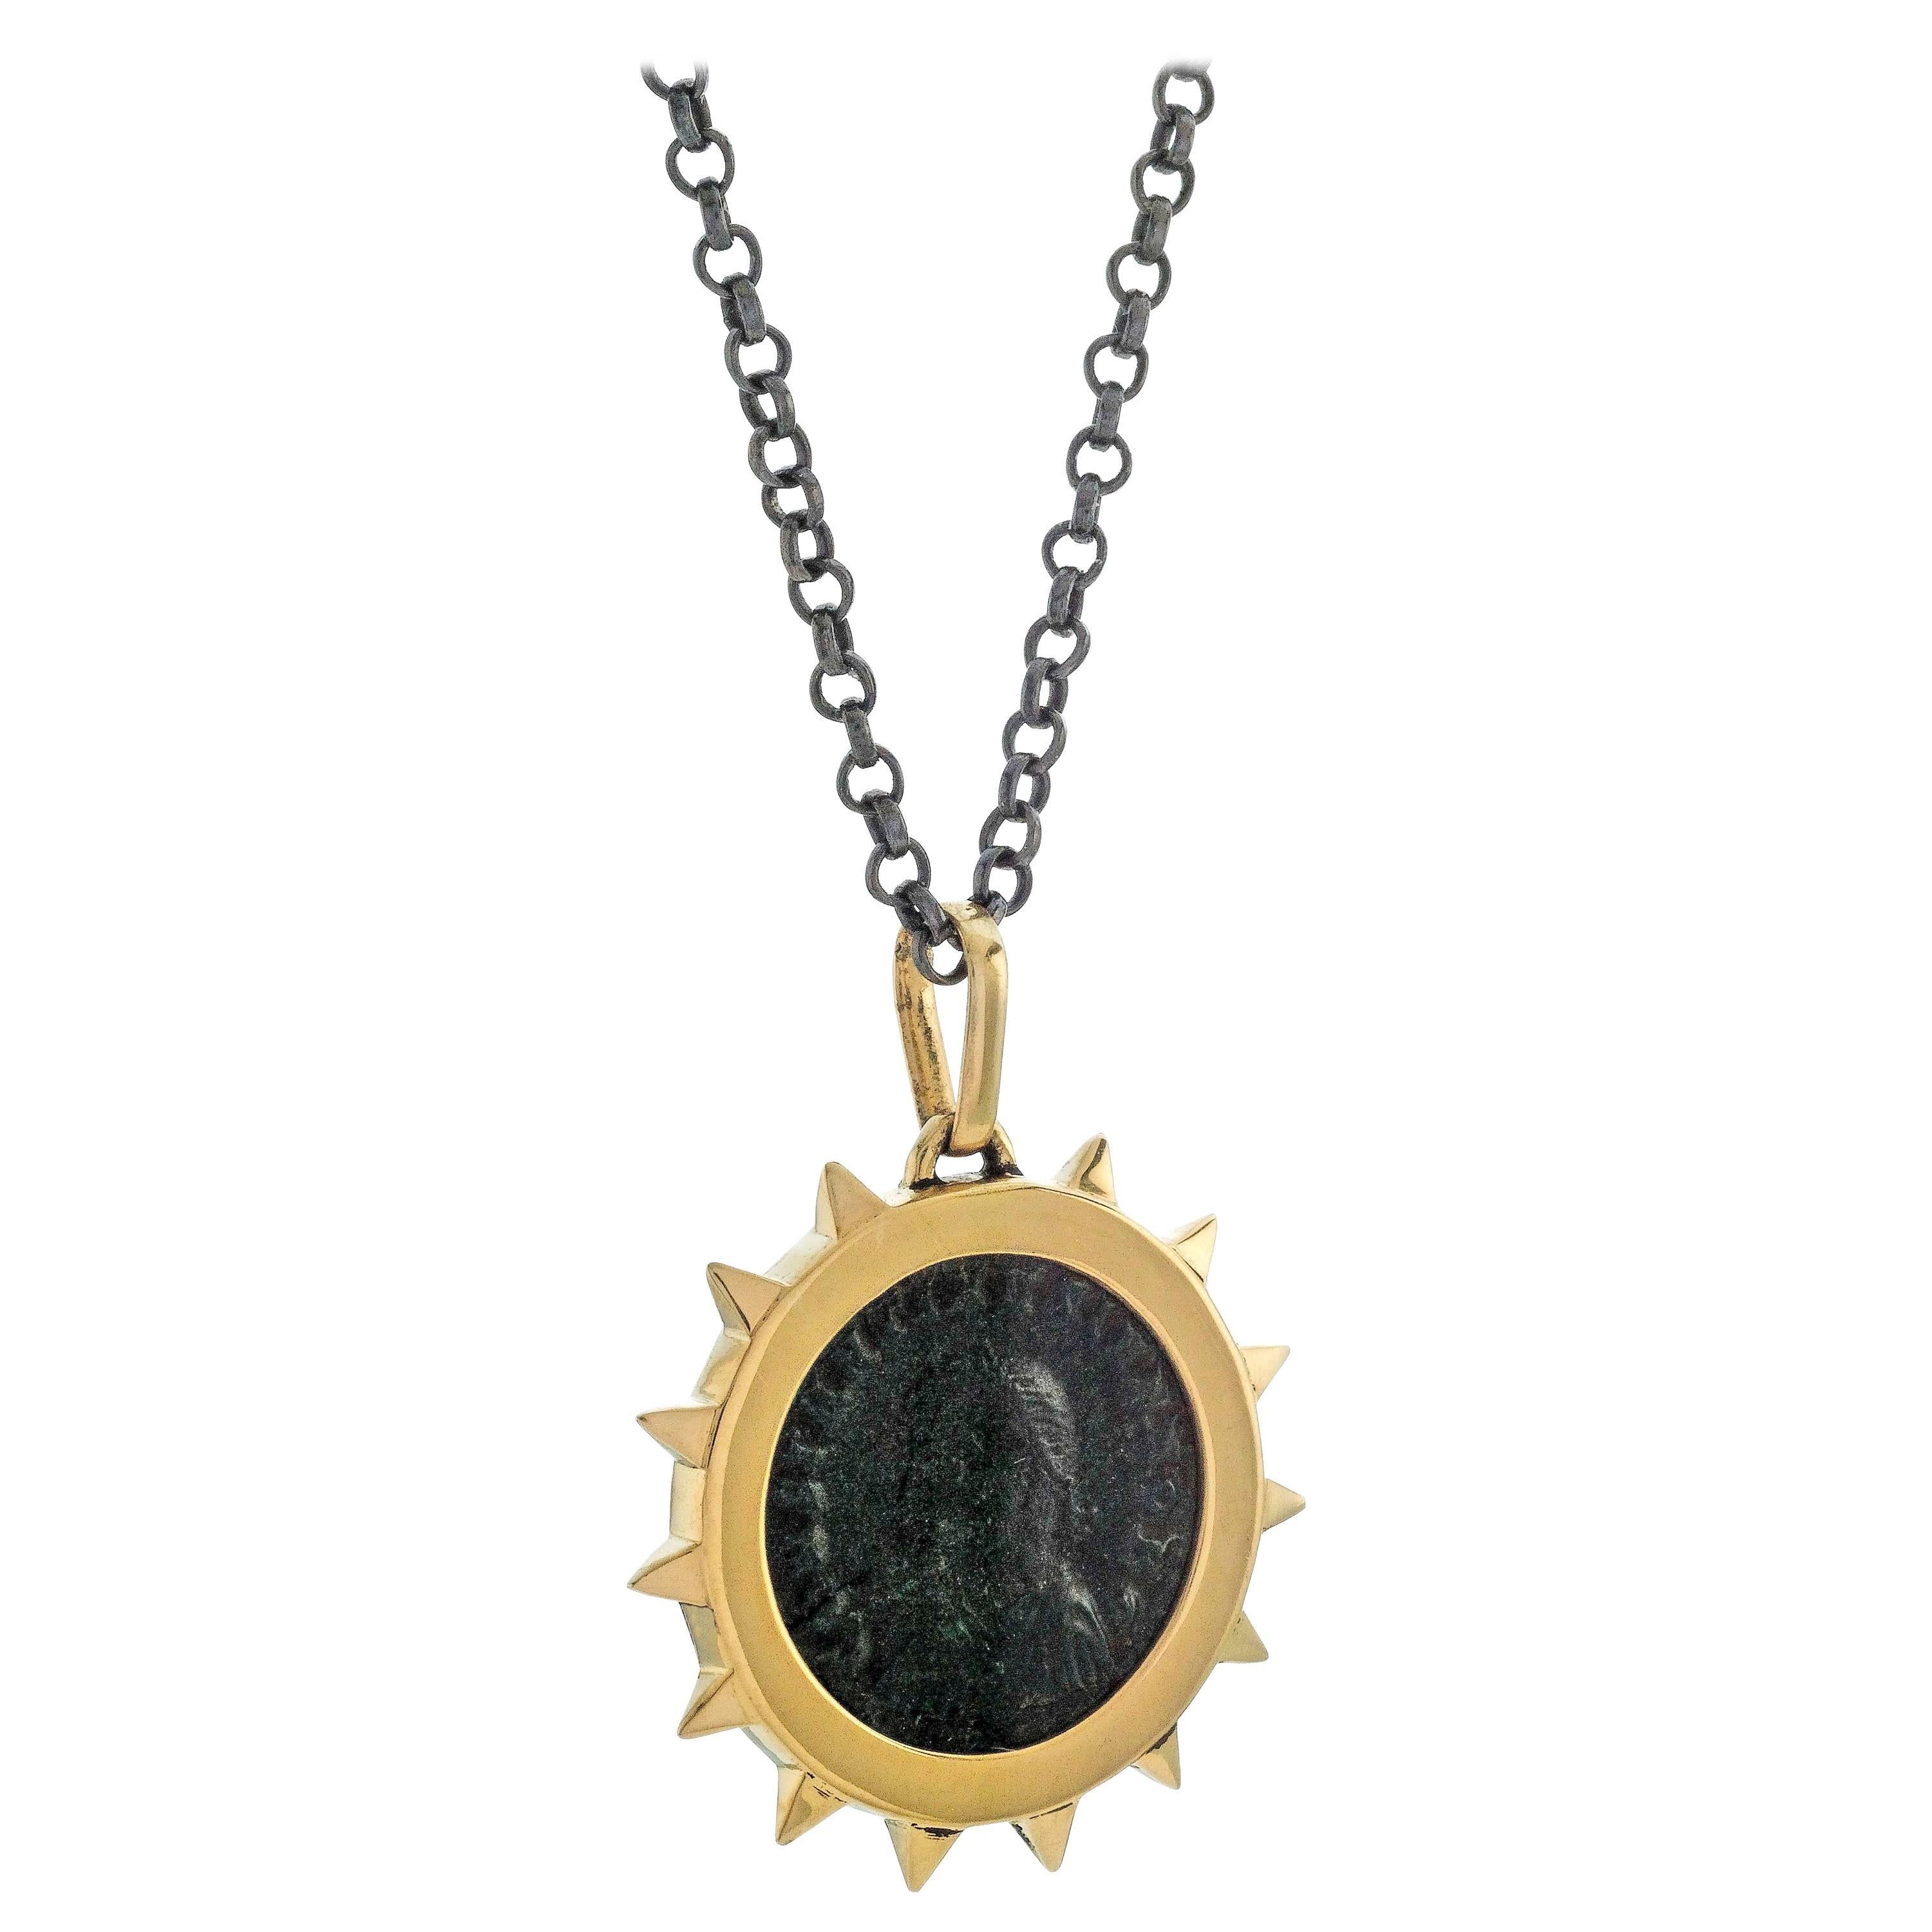 1884 Collection Ancient Roman Coin Gold Pendant Necklace Chain For Sale